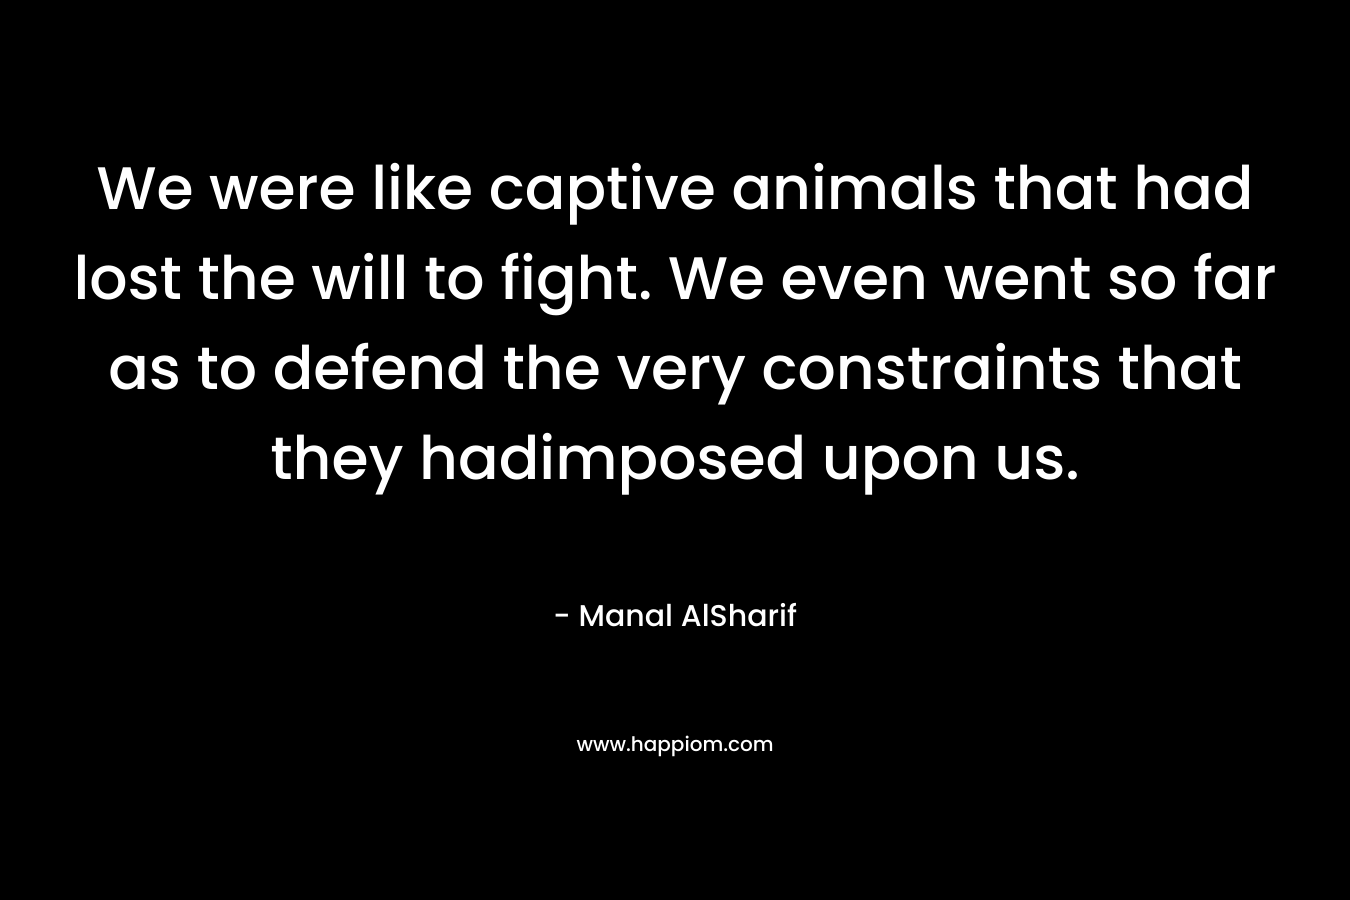 We were like captive animals that had lost the will to fight. We even went so far as to defend the very constraints that they hadimposed upon us.